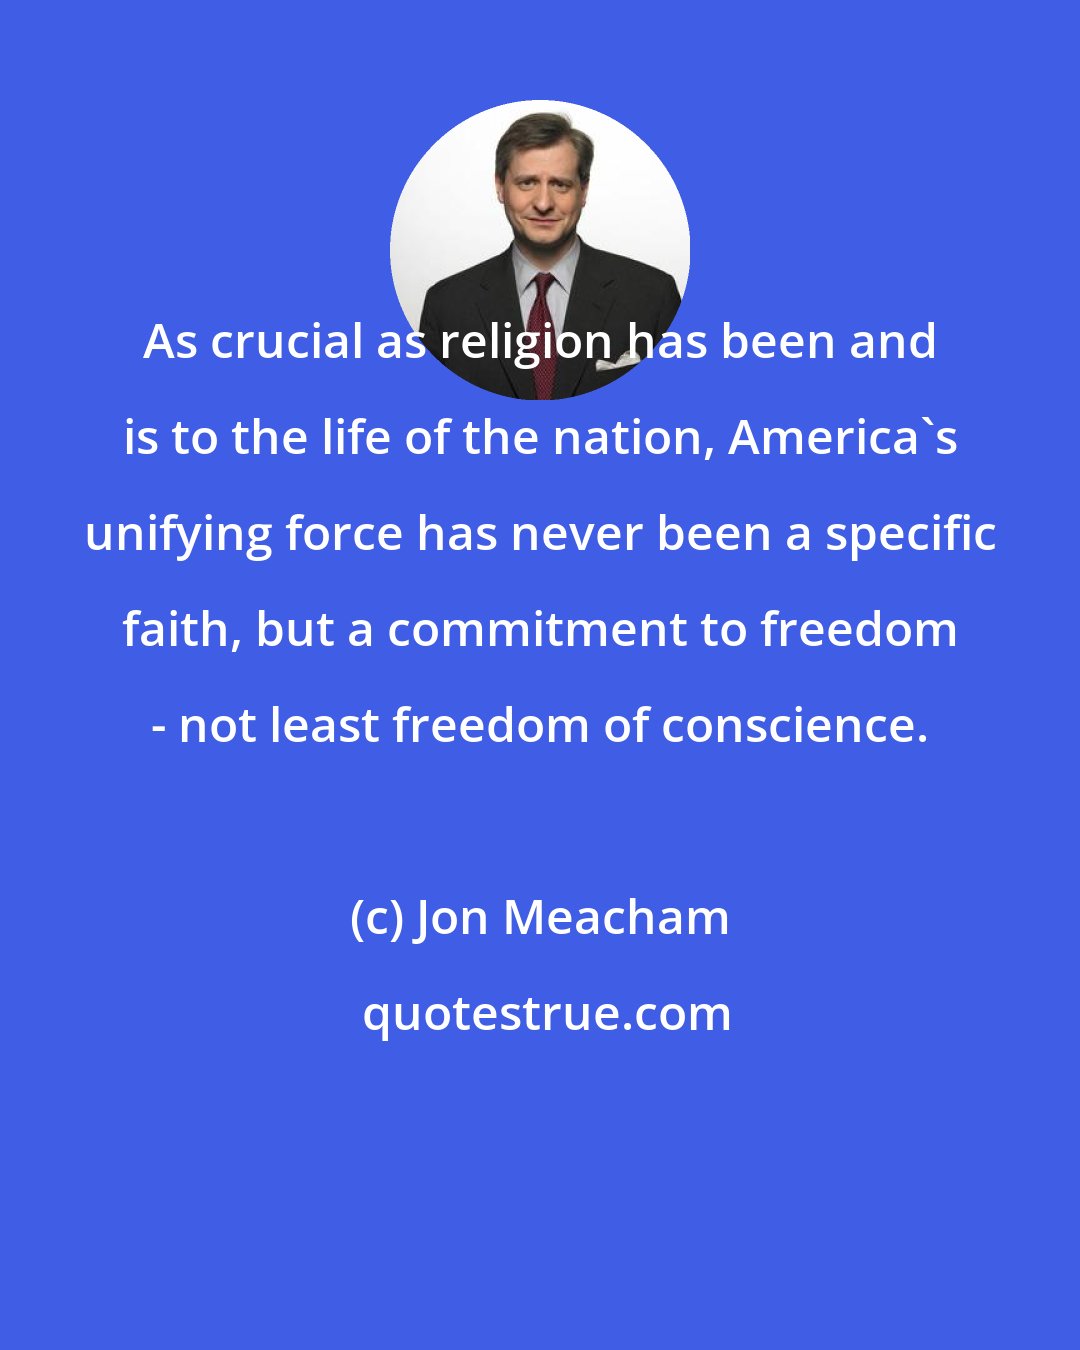 Jon Meacham: As crucial as religion has been and is to the life of the nation, America's unifying force has never been a specific faith, but a commitment to freedom - not least freedom of conscience.